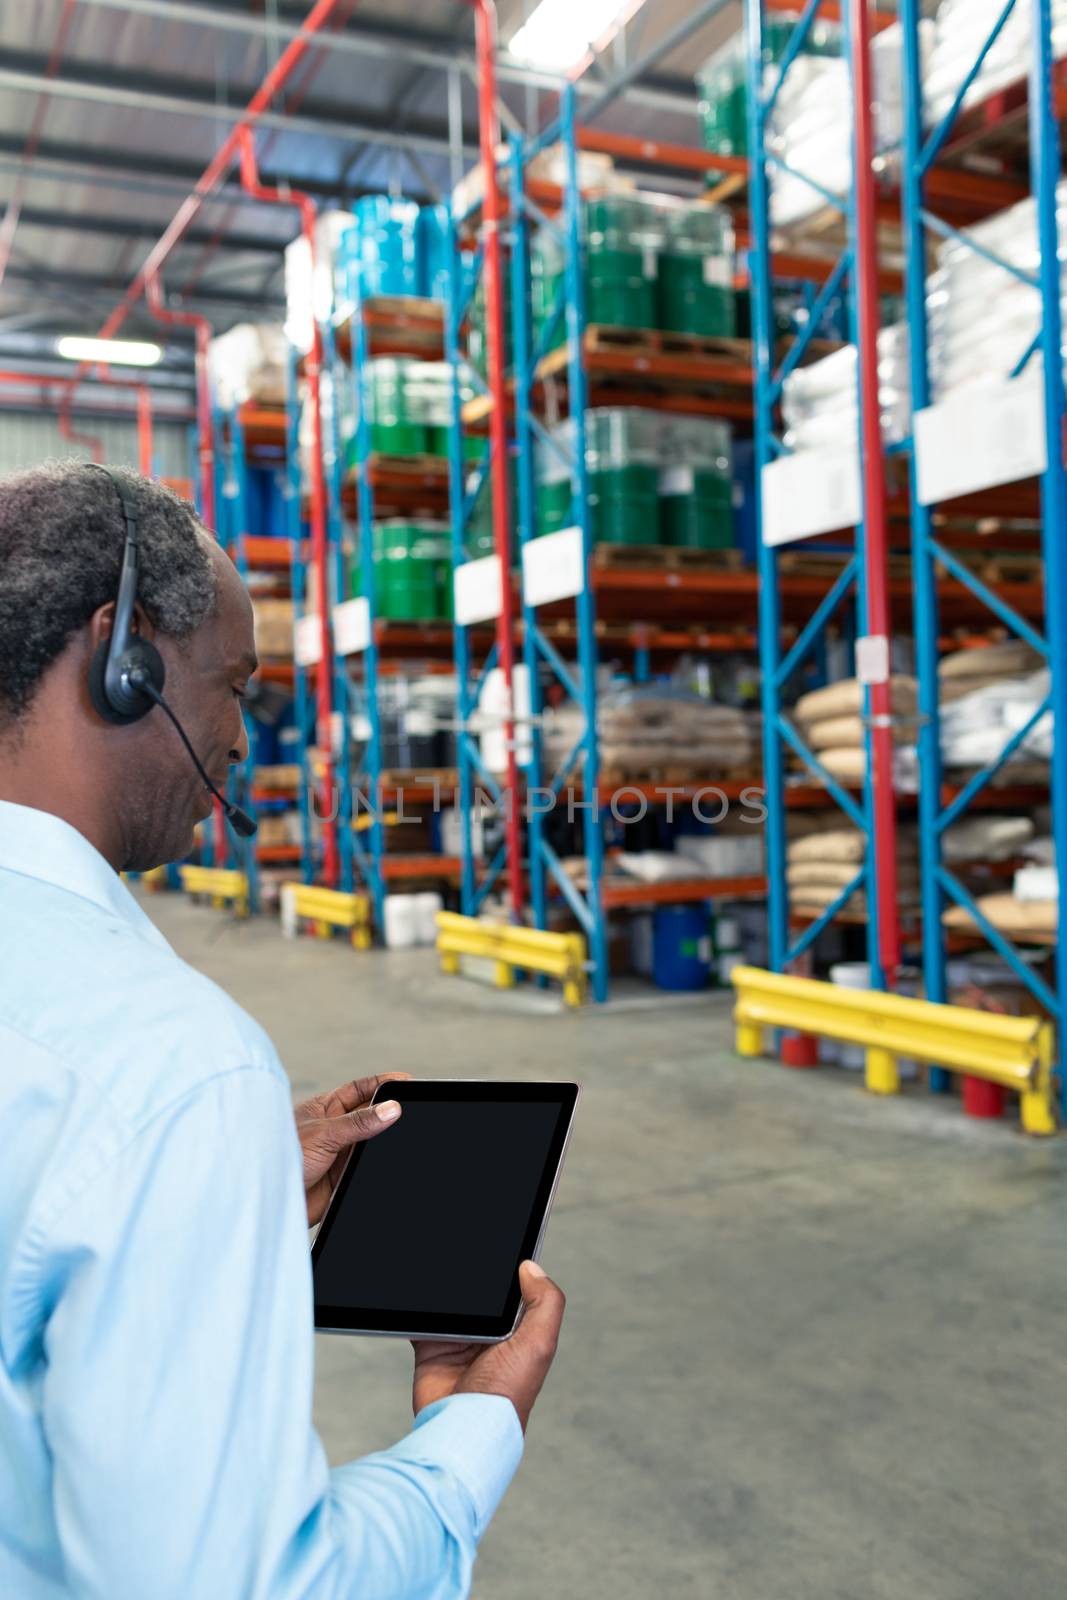 Rear view of mature African-american male supervisor with headset using digital tablet in warehouse. This is a freight transportation and distribution warehouse. Industrial and industrial workers concept